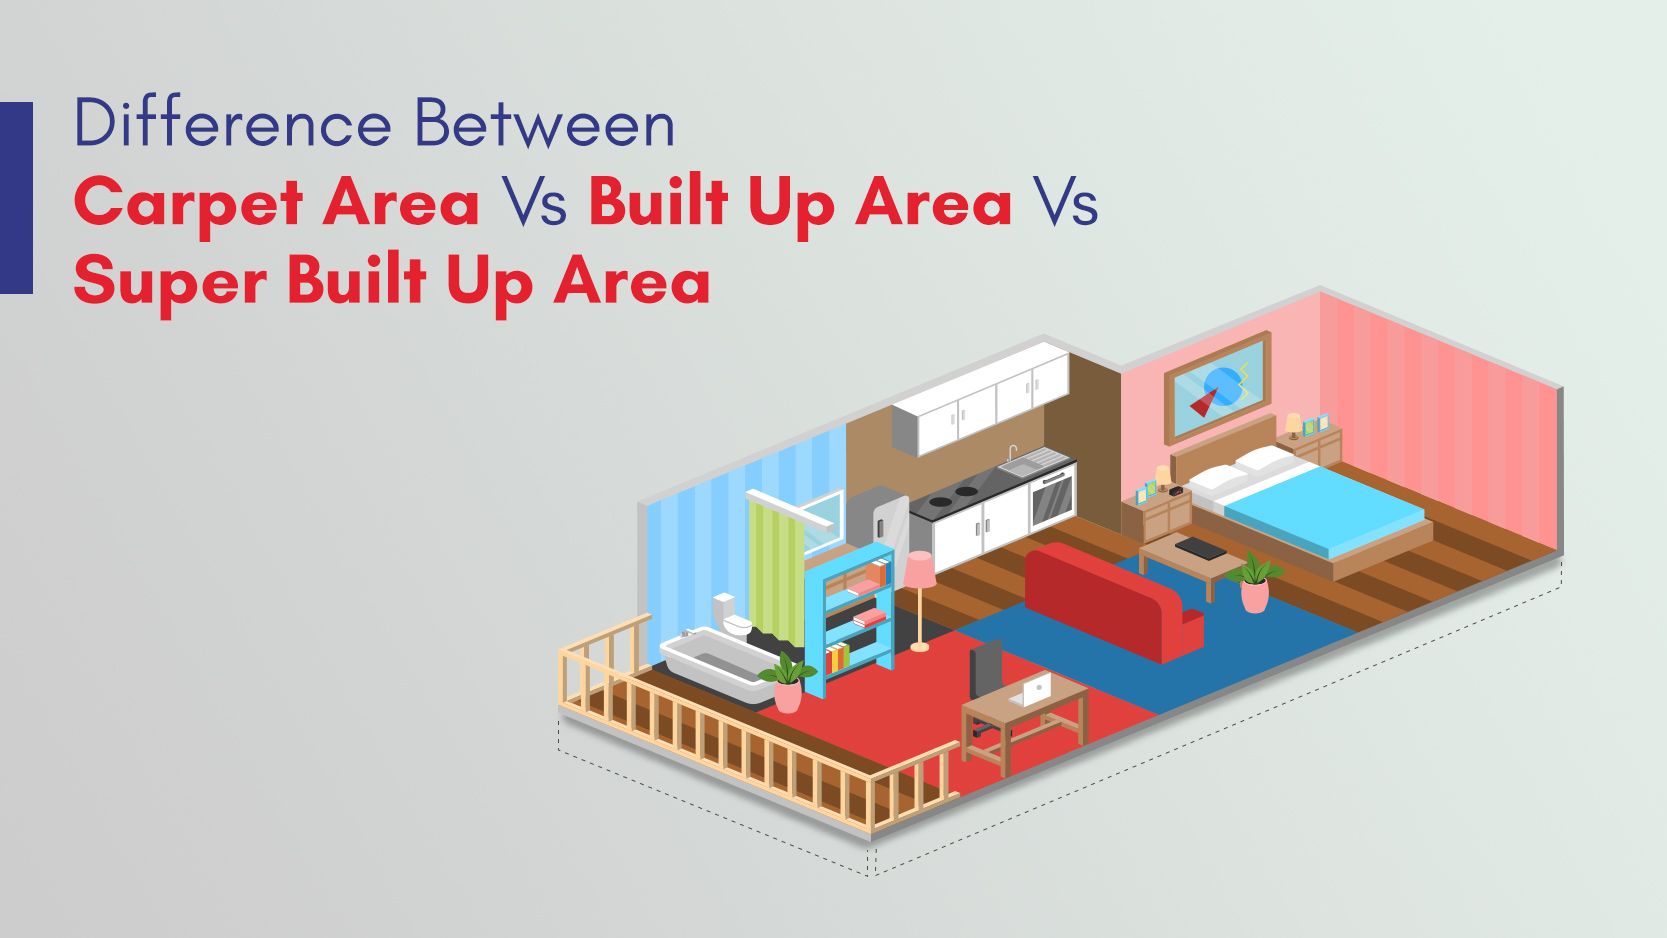 Carpet Area Vs Built Up Area Vs

Difference Between
Super Built Up Area